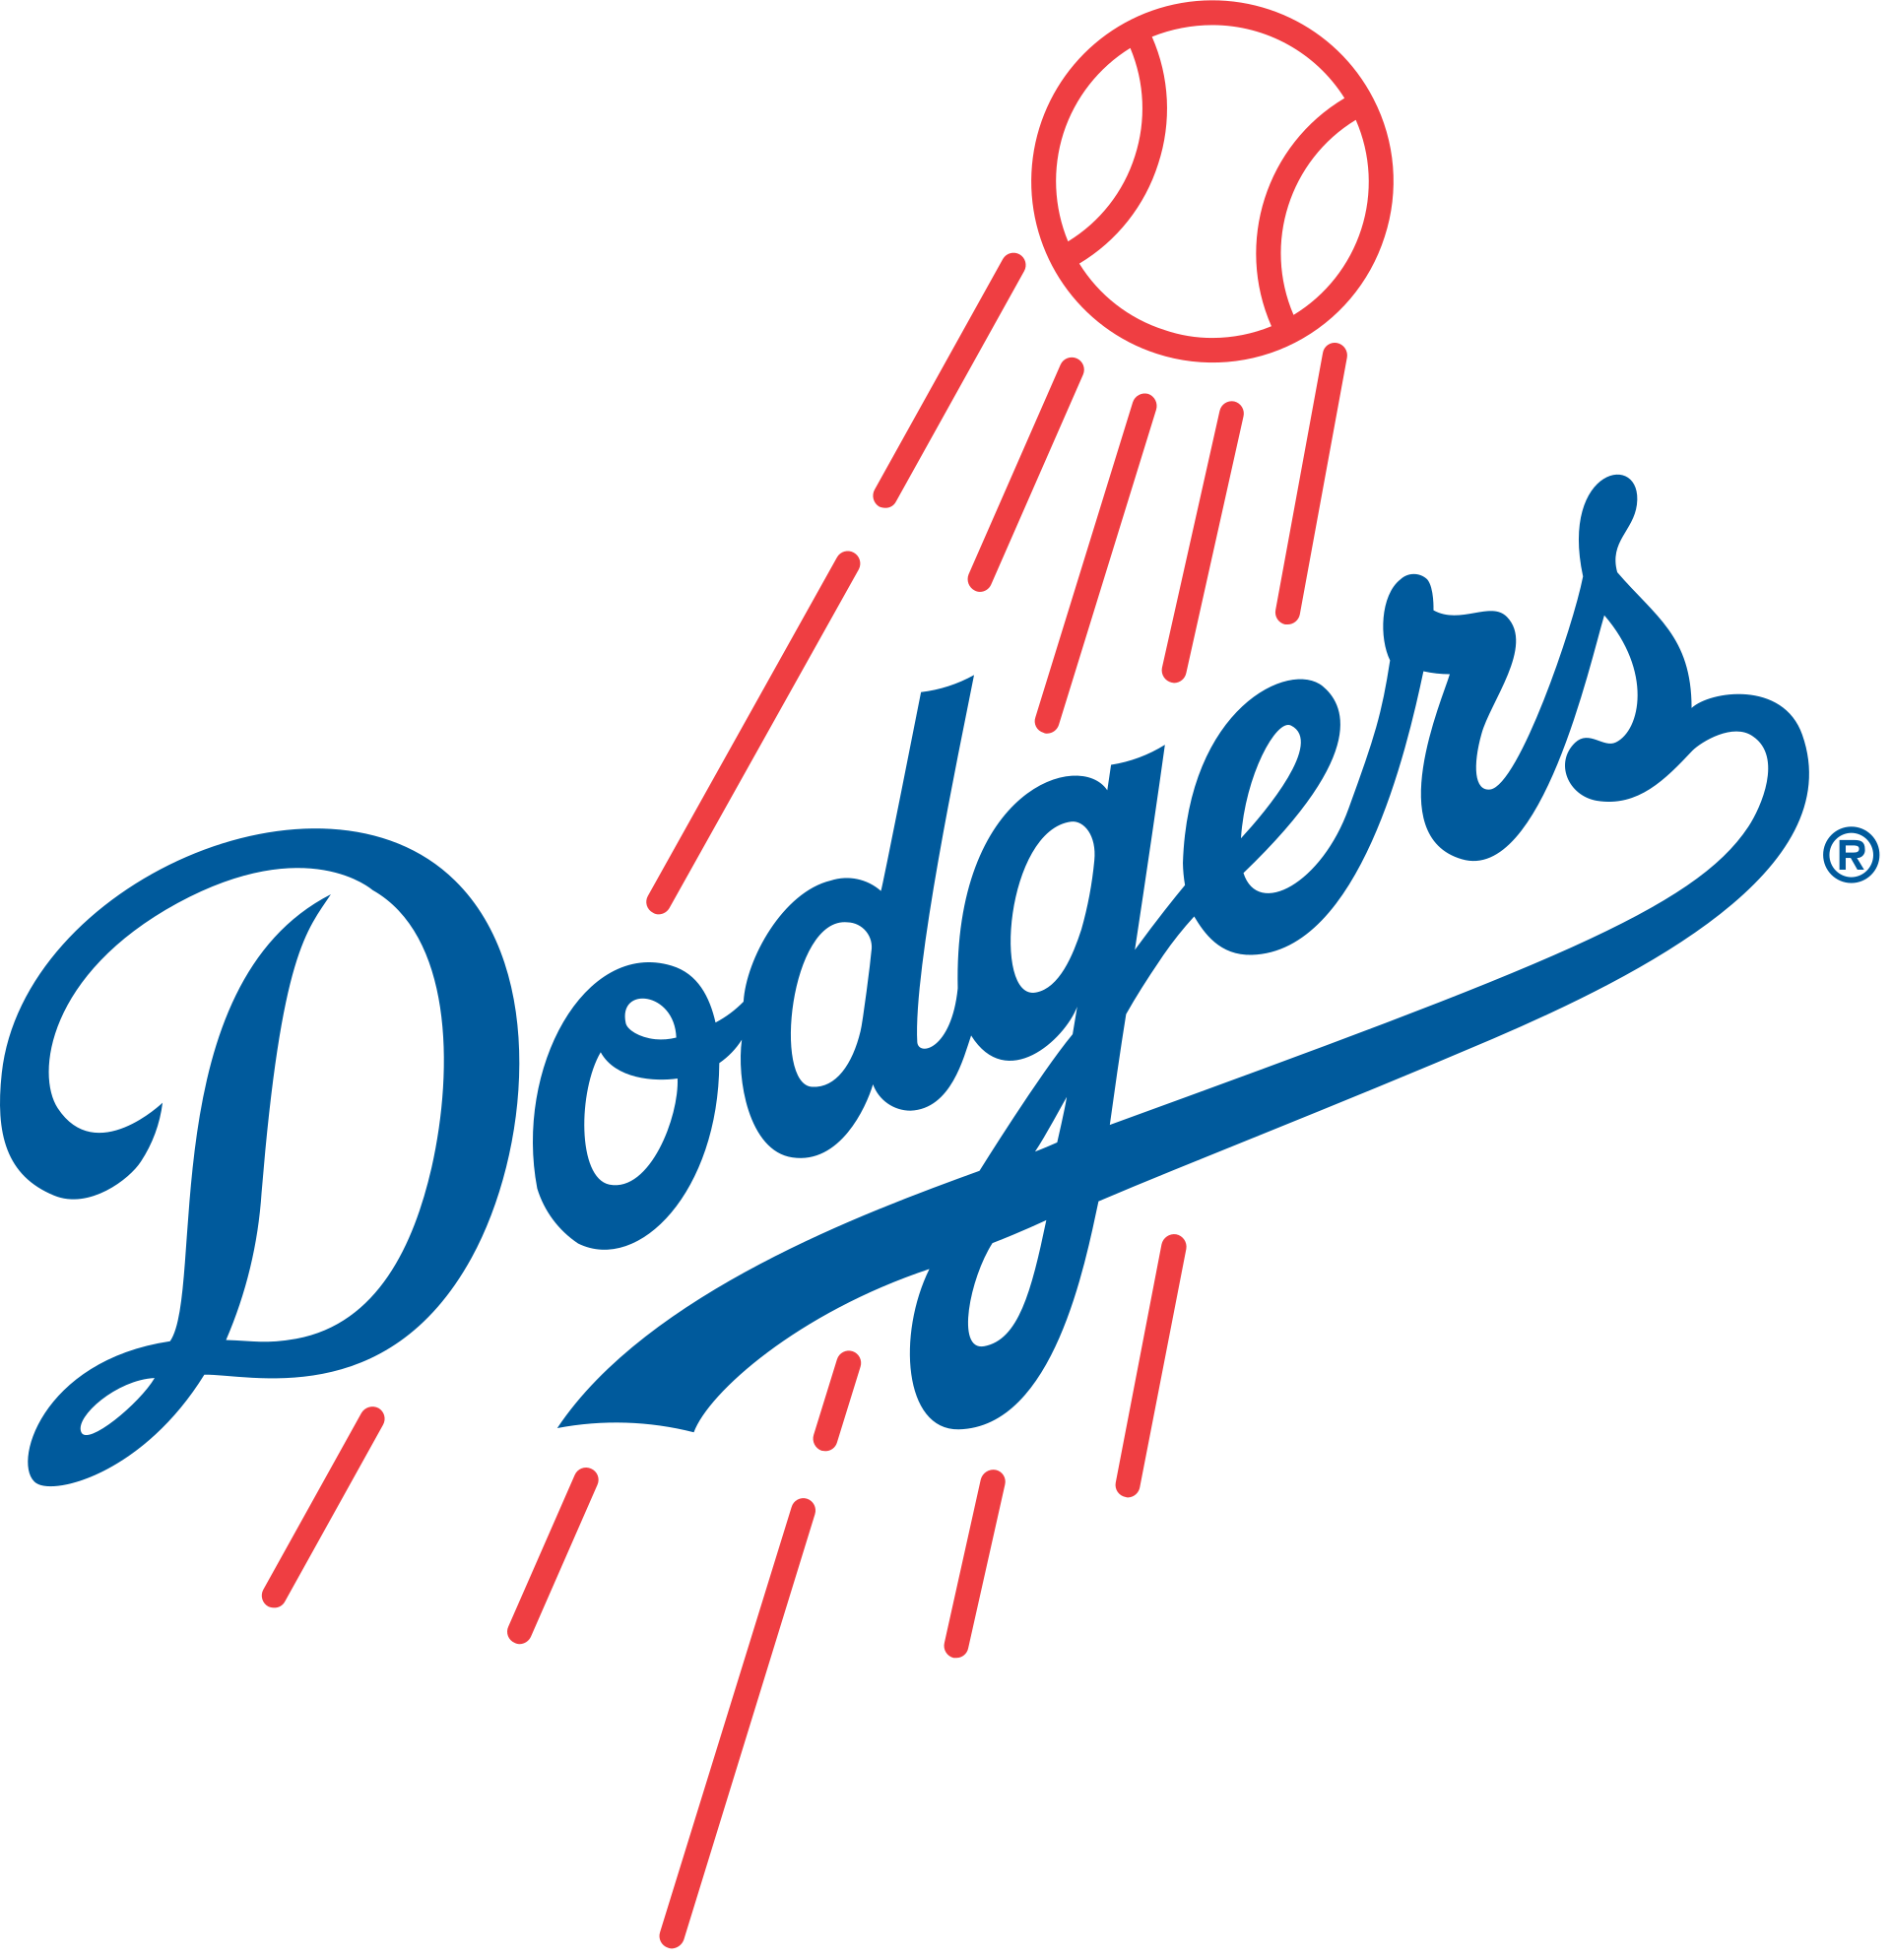 Los Angeles Dodgers Filipino Heritage Night Jersey Giveaway 2023